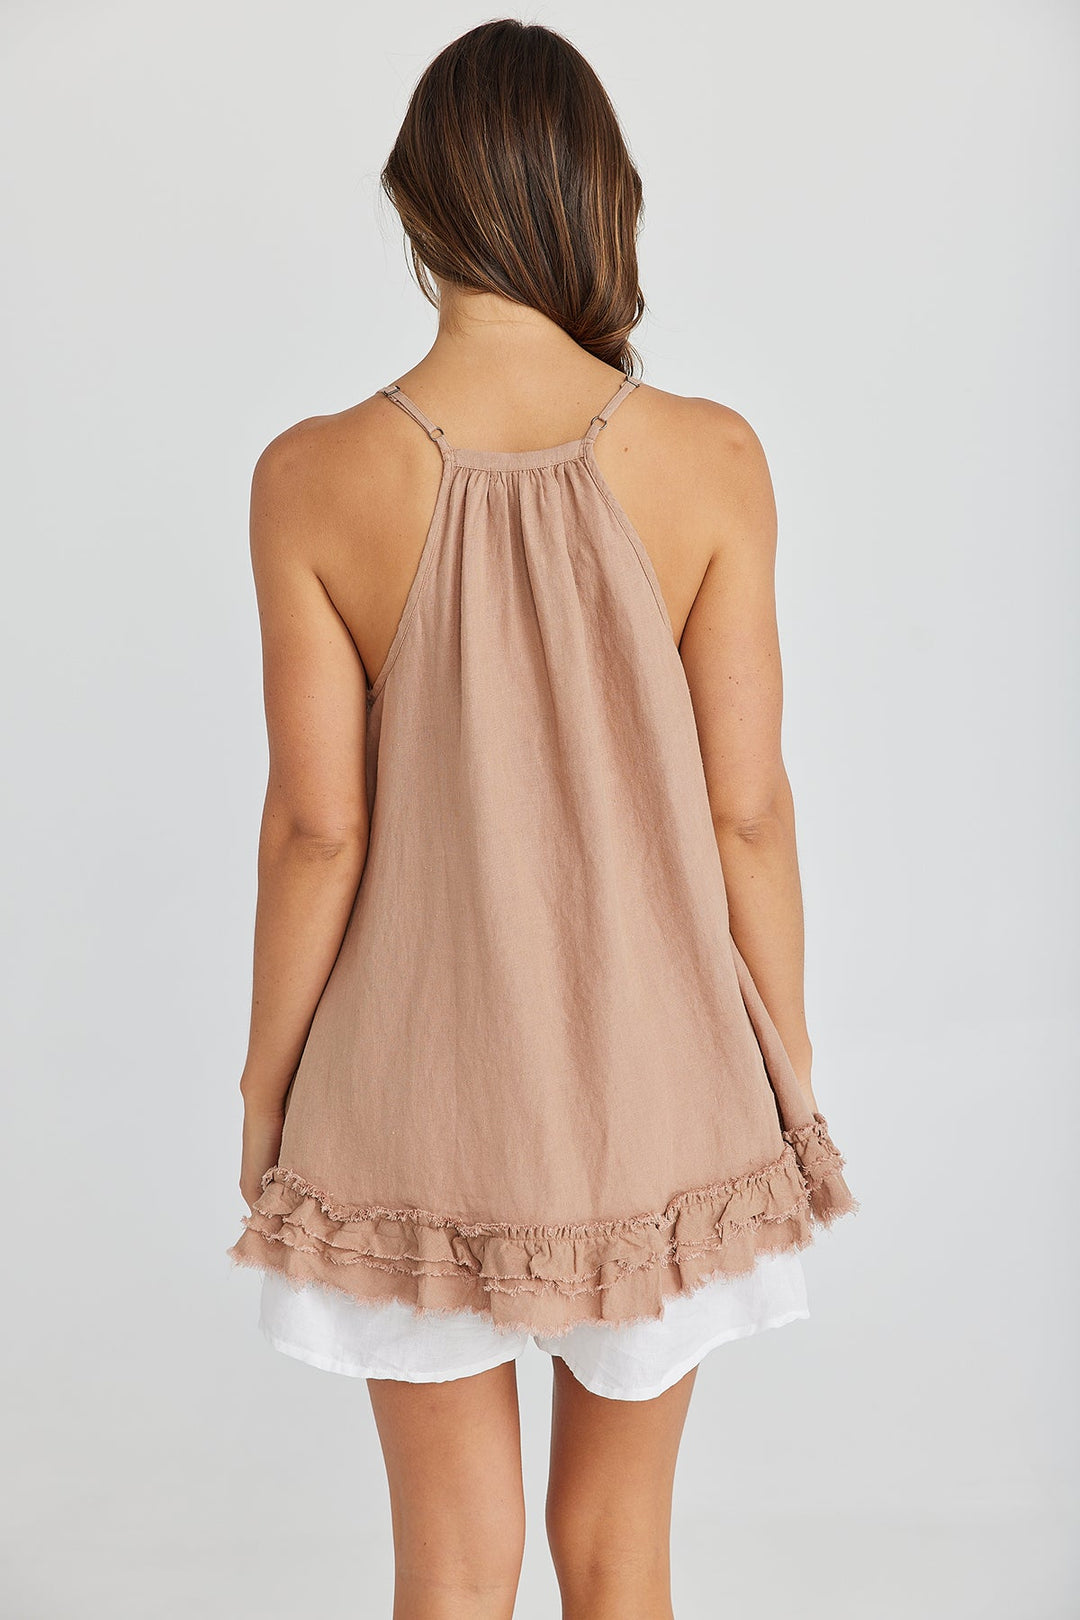 Woman wearing a brown singlet and white shorts by The Shanty Corporation sold and shipped from Pizazz Boutiques Nelson Bay dress shops Australia Back View